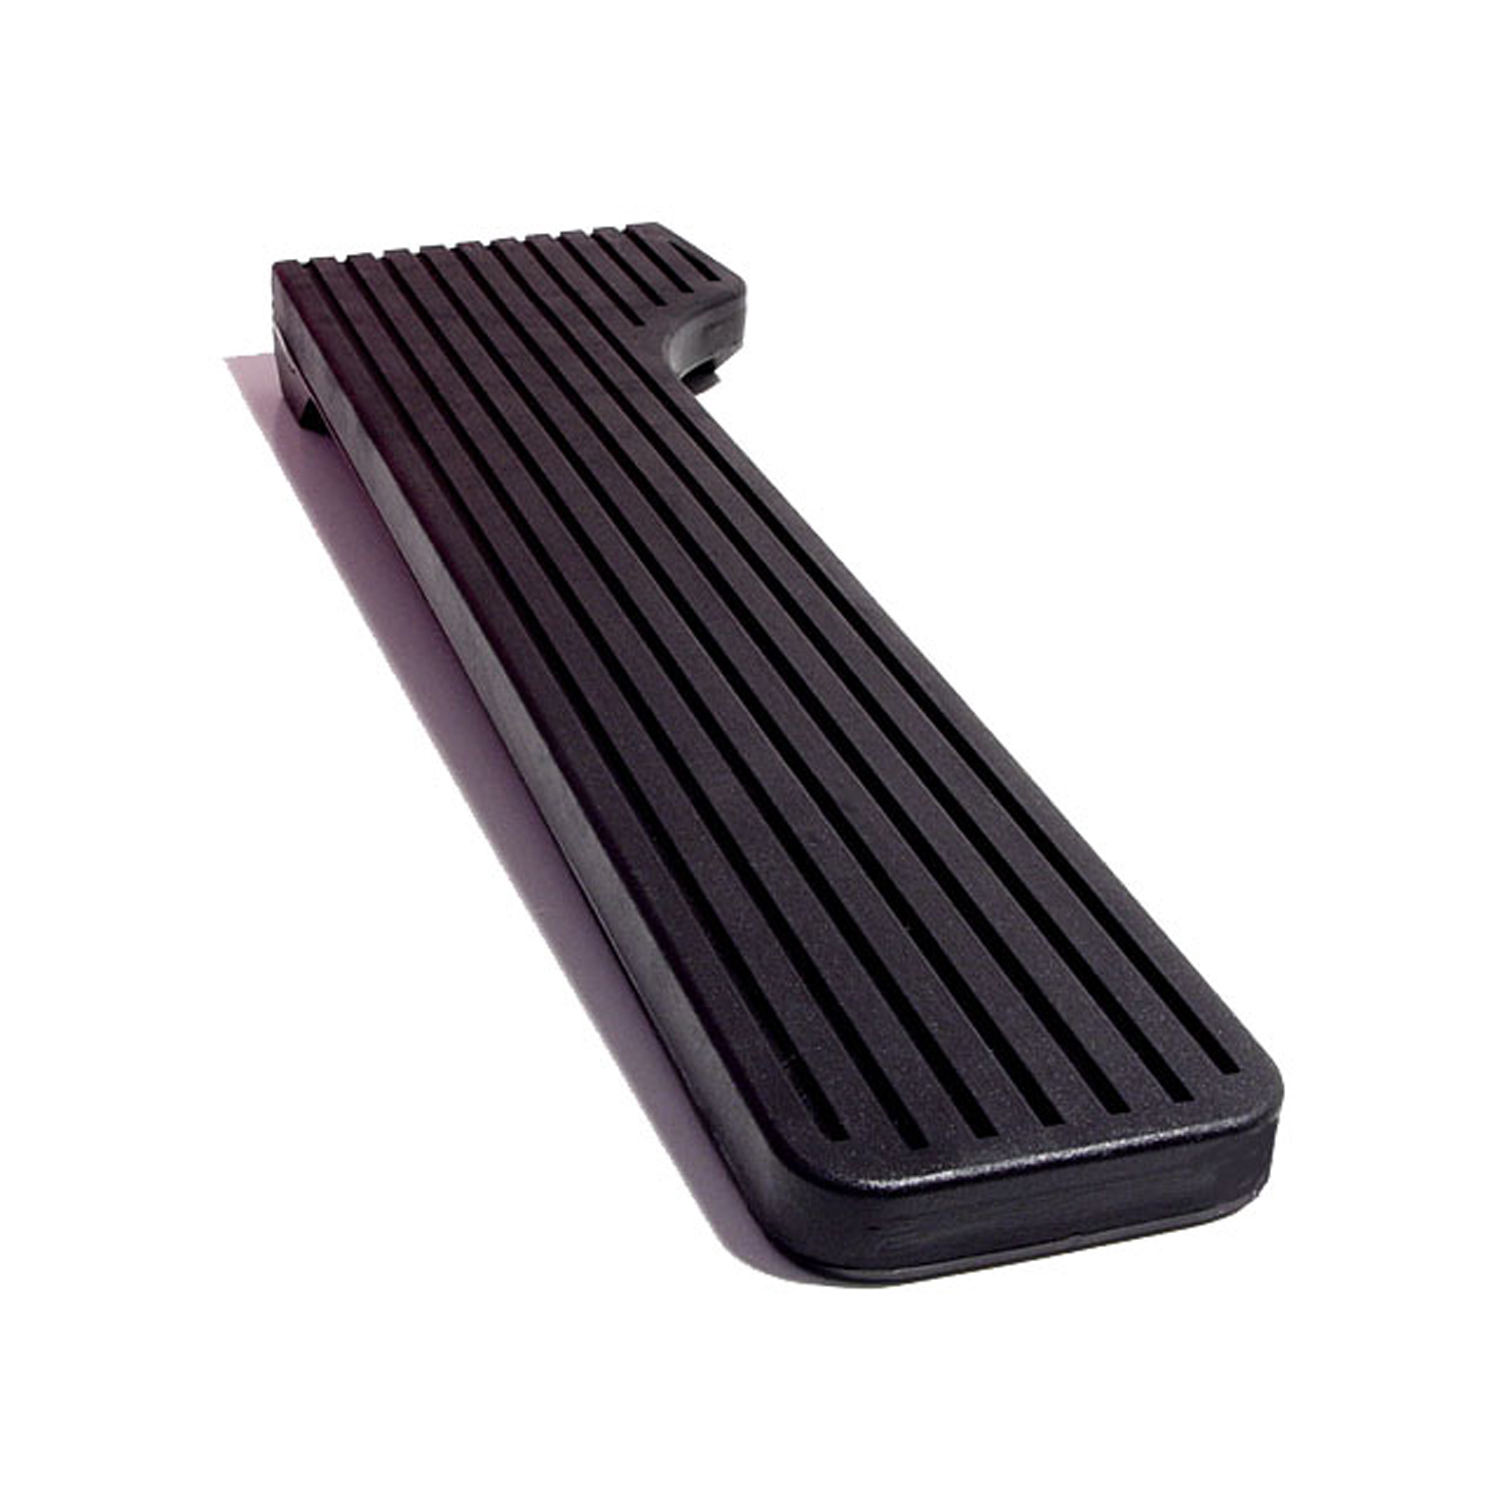 1968 Chevrolet Bel Air Accelerator Pedal Pad without flange-AP 31-B